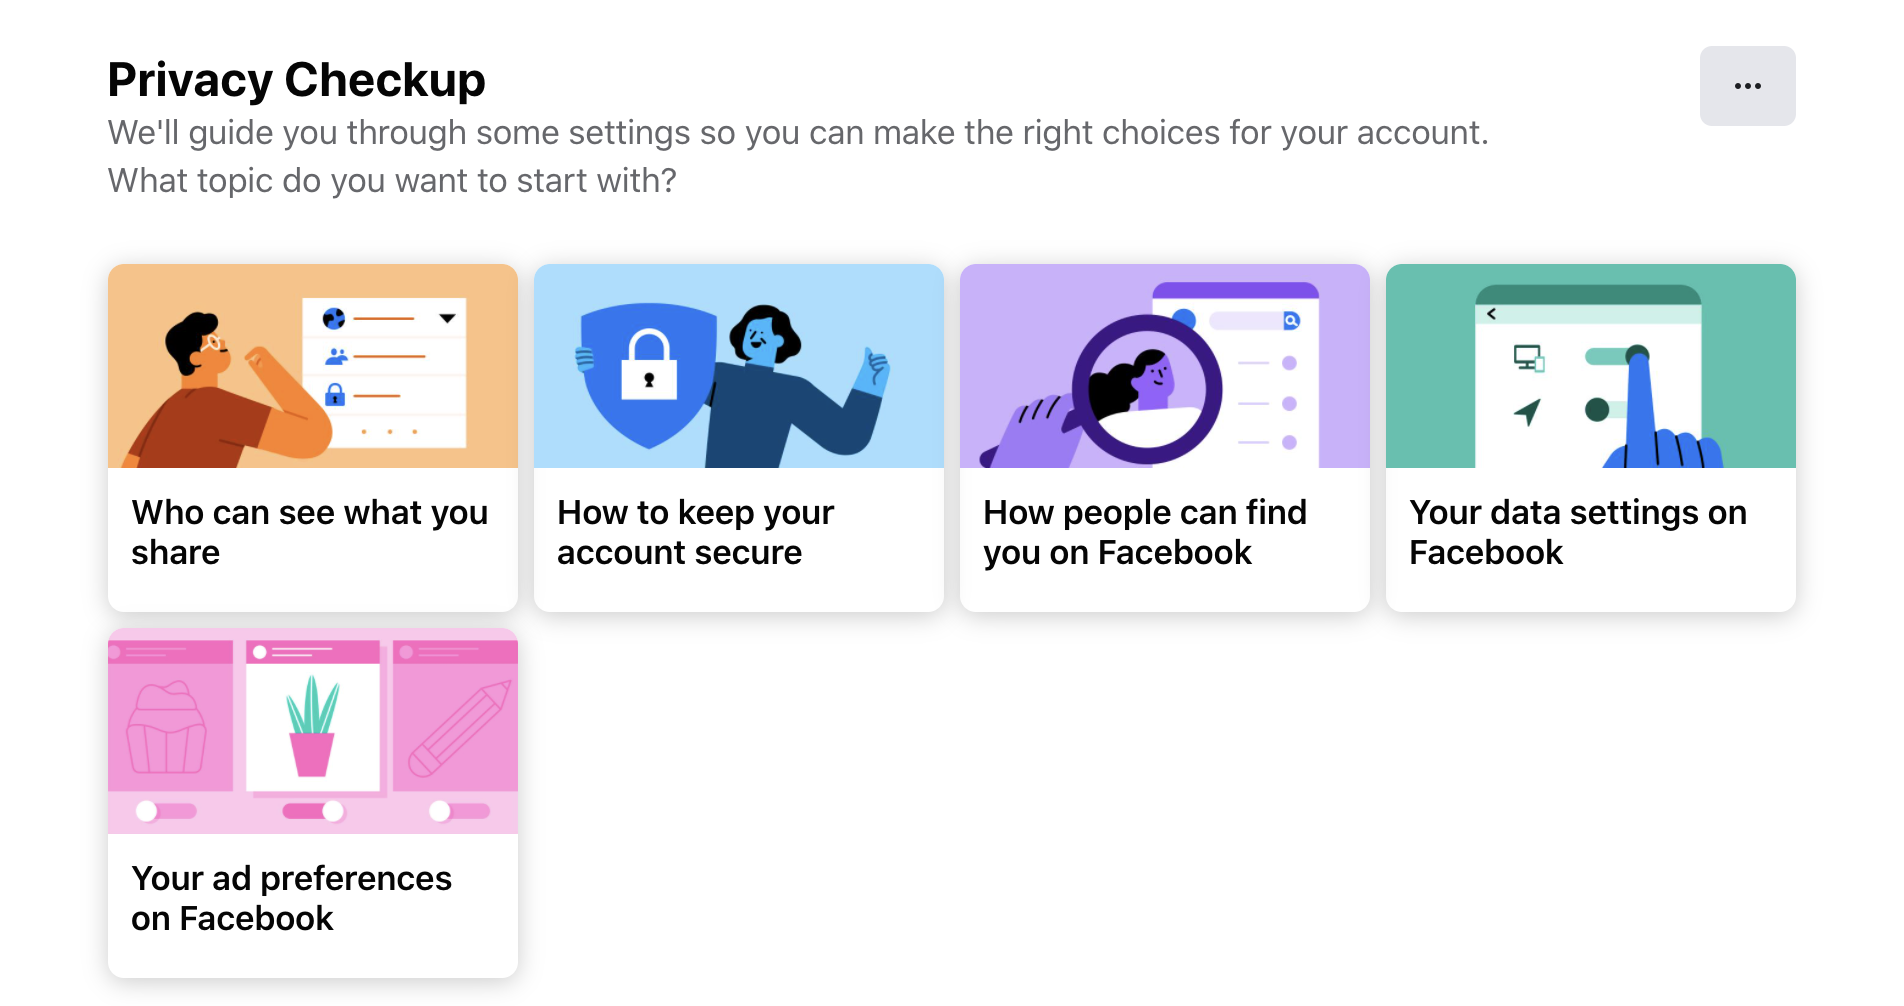 Easily navigate and choose your settings for everything from ad preferences to how people can find you.